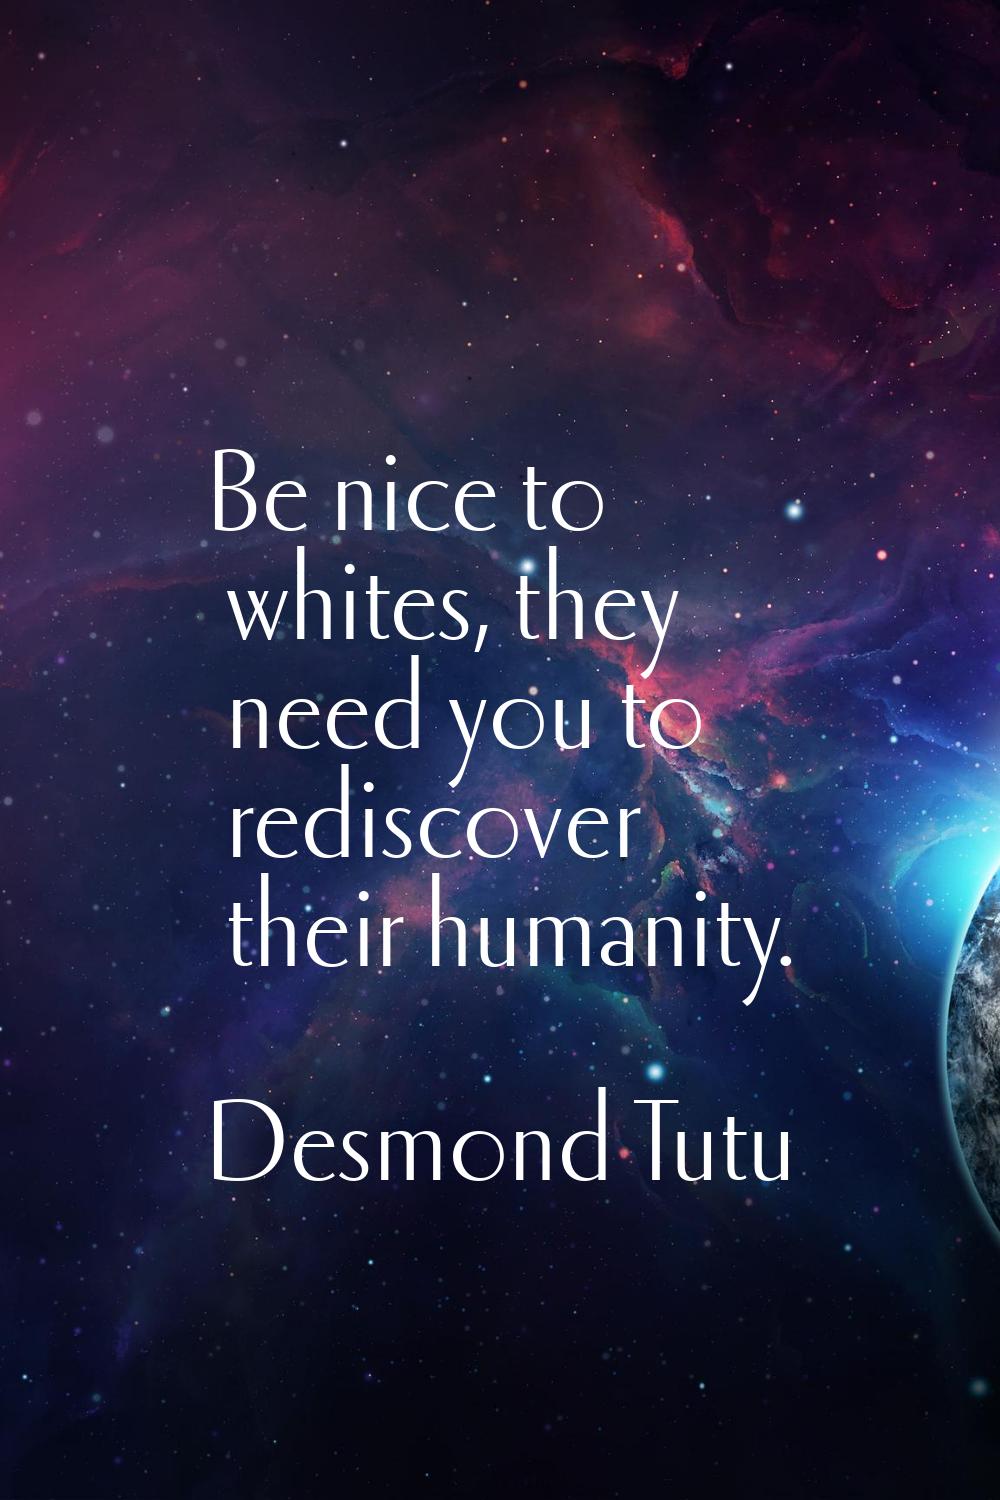 Be nice to whites, they need you to rediscover their humanity.